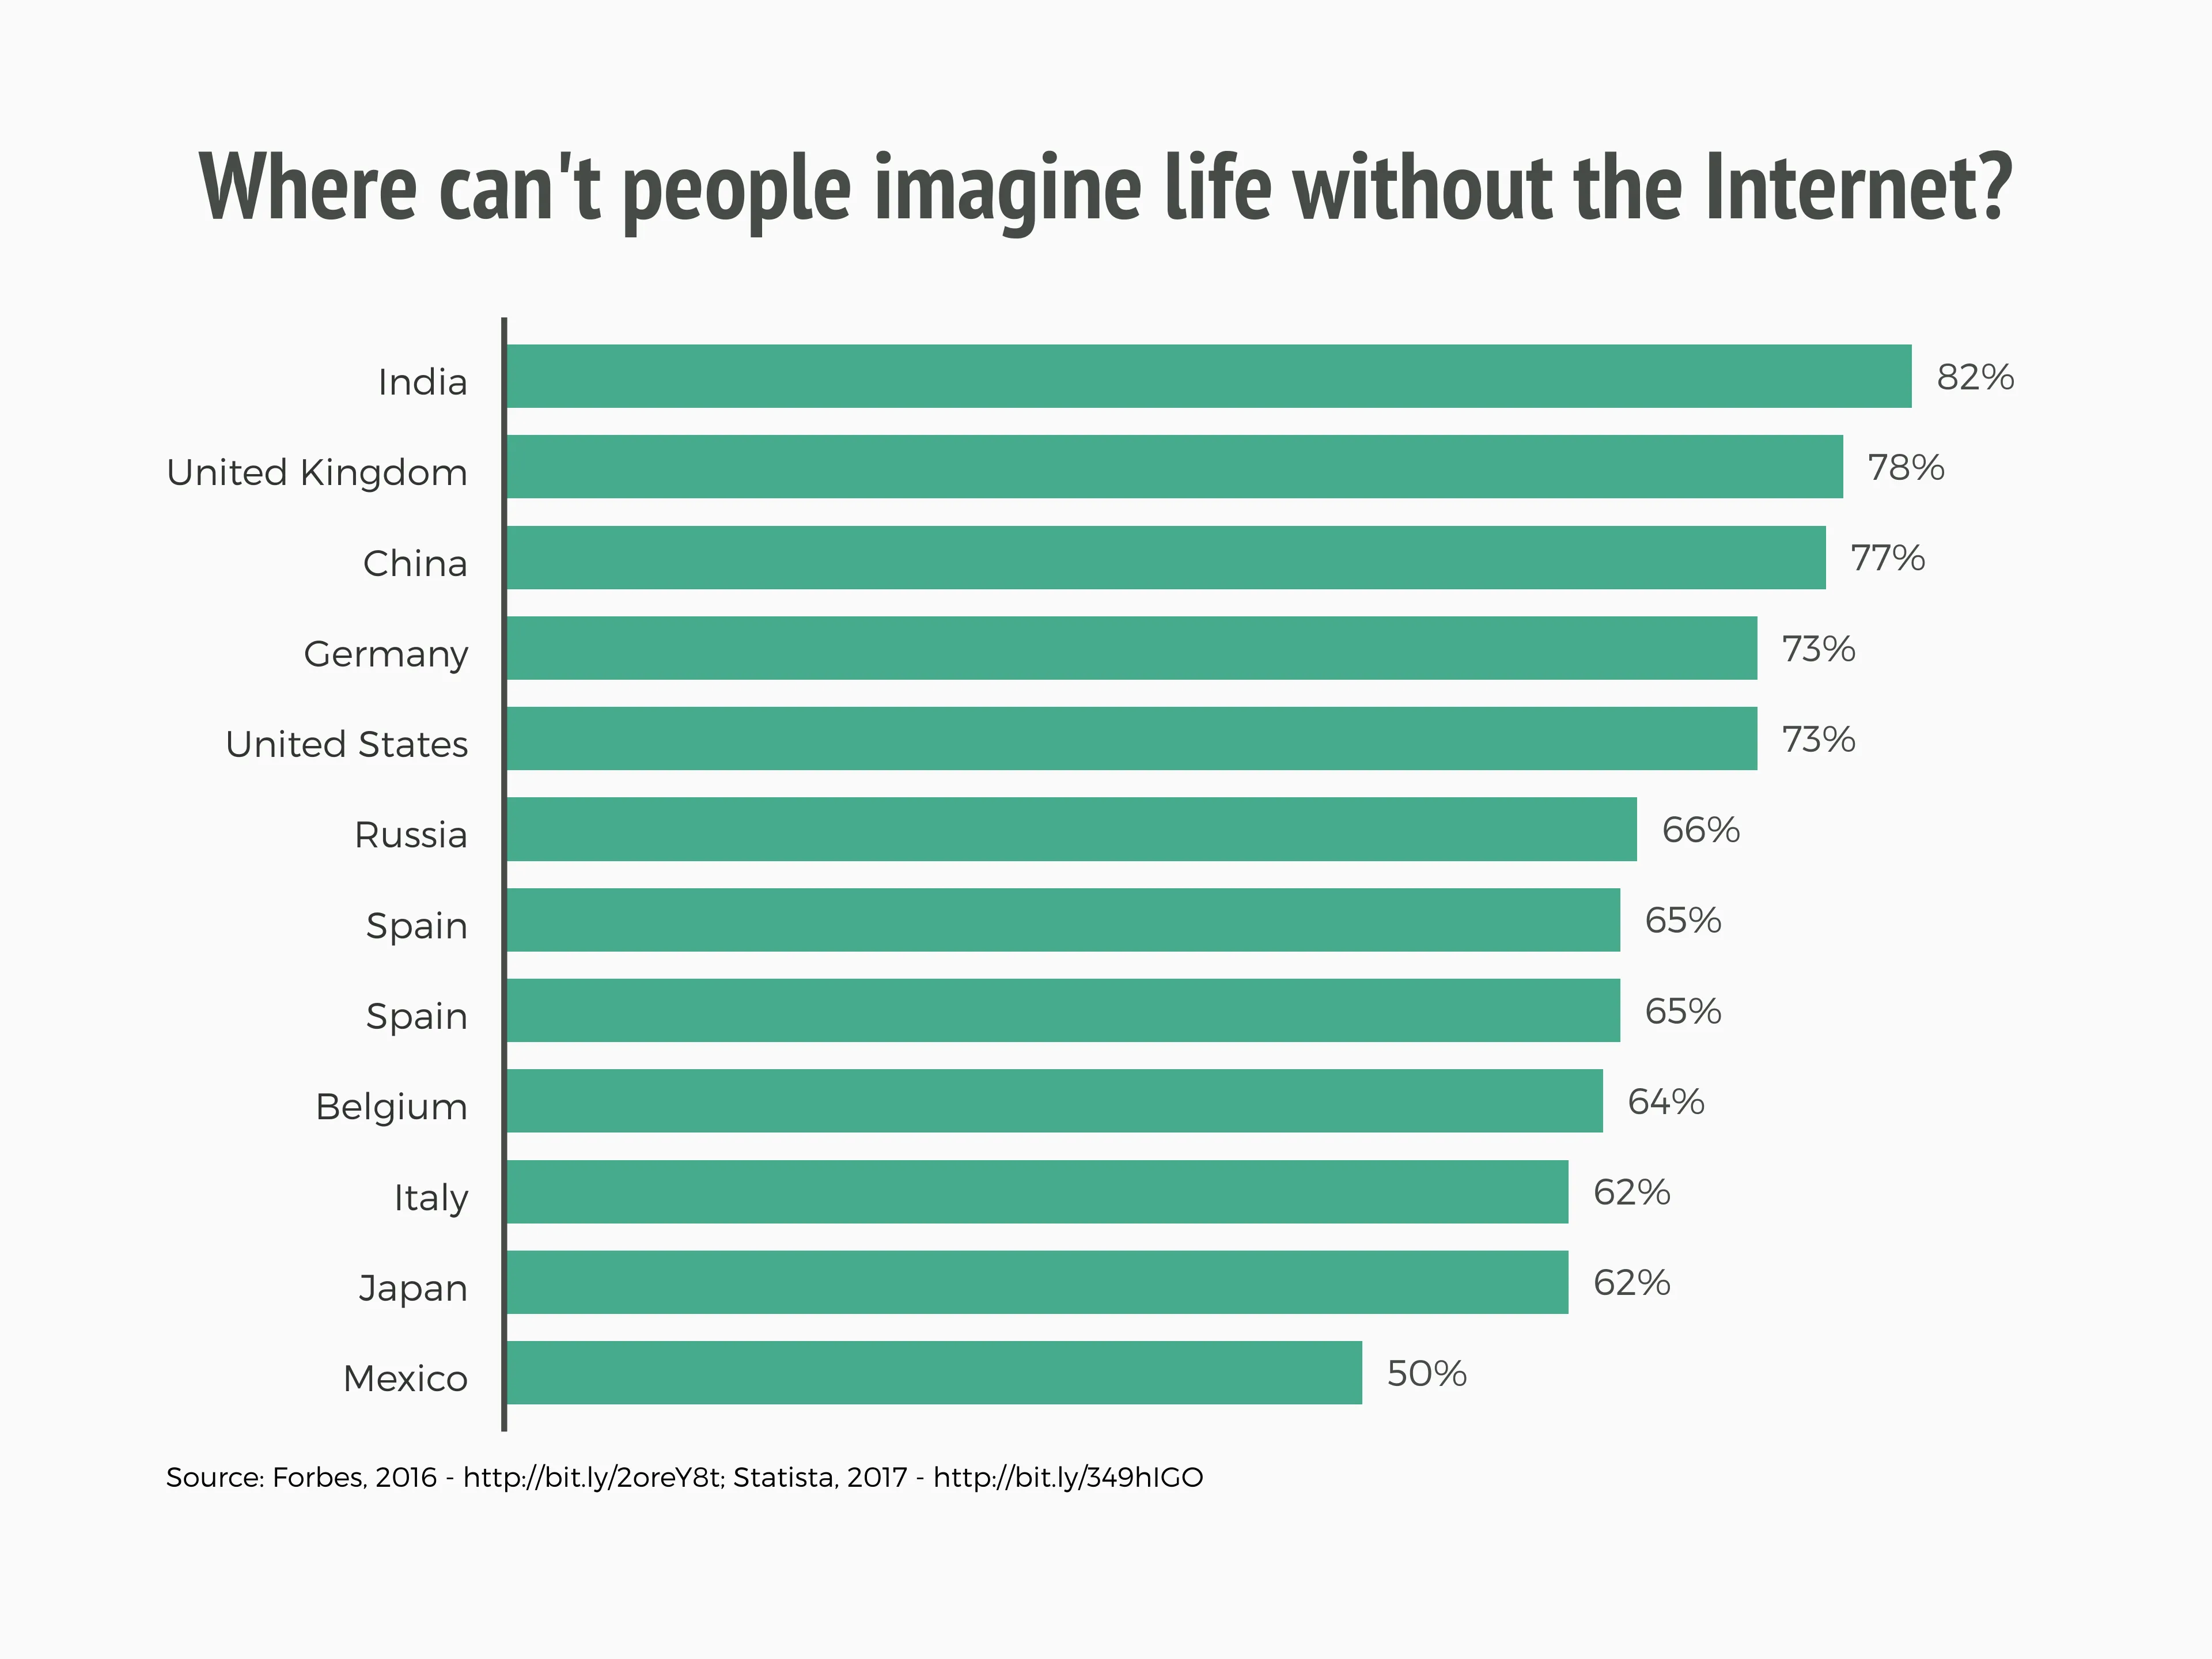 Where can't people imagine life without the Internet?